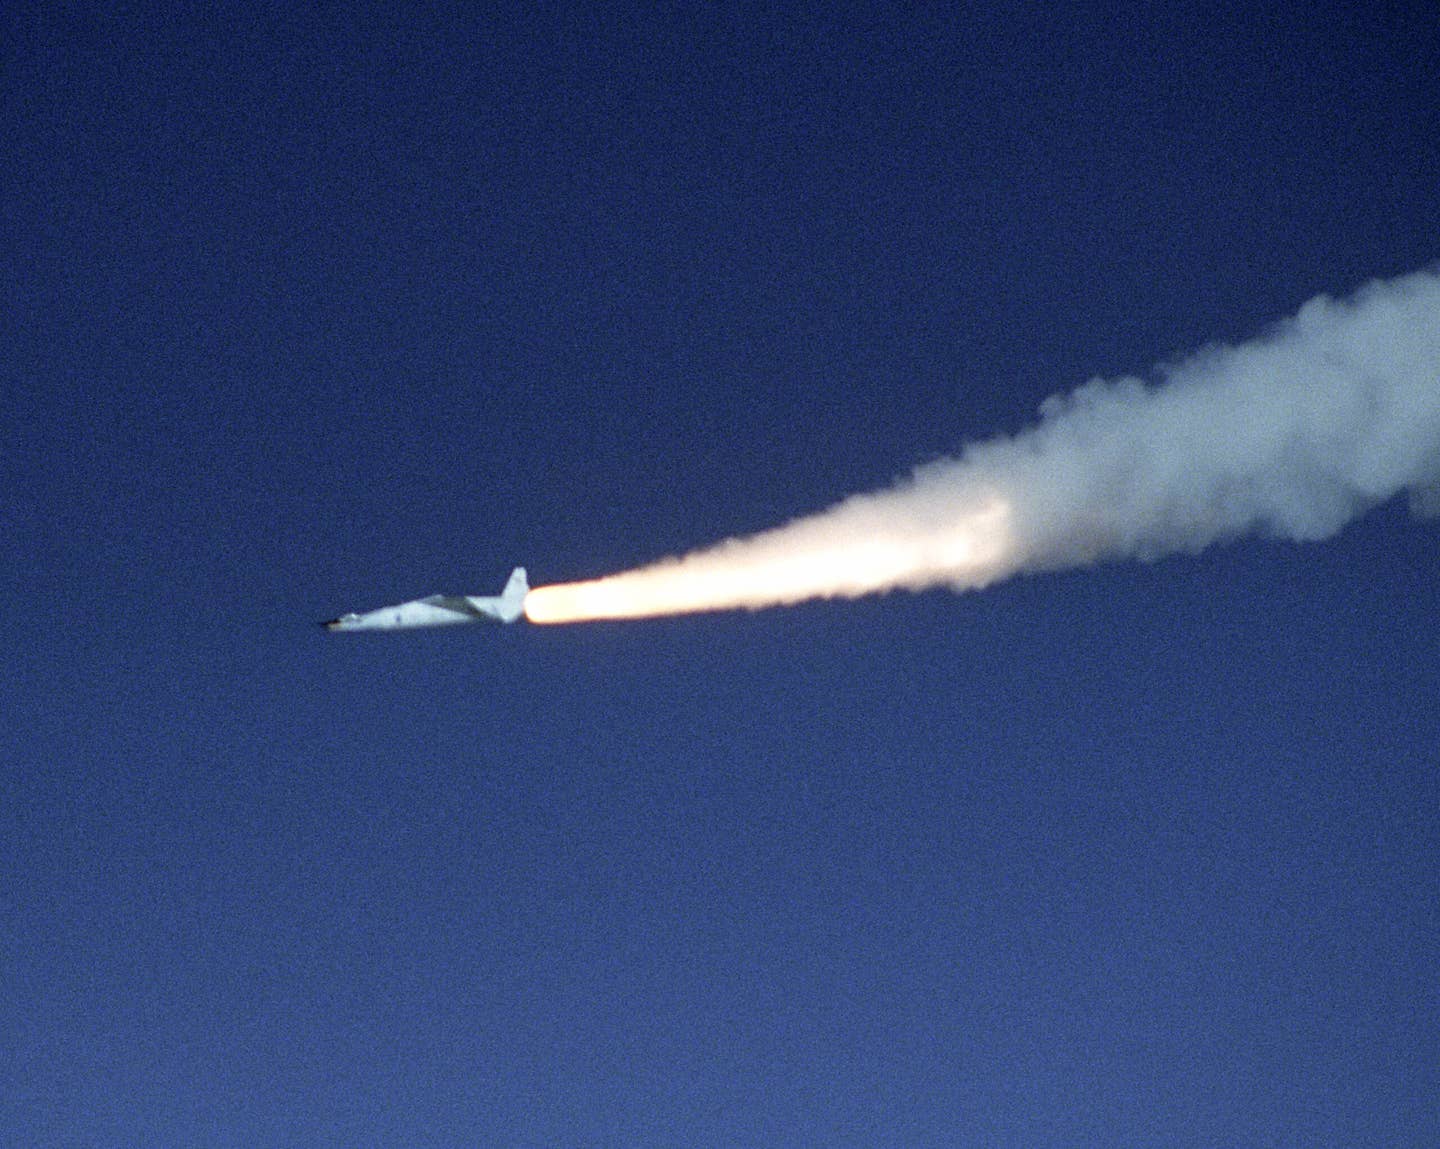 An X-43A hypersonic research aircraft and its modified Pegasus booster rocket accelerate after launch from NASA's B-52B launch aircraft over the Pacific Ocean. <em>Credit: NASA photo by Carla Thomas</em>